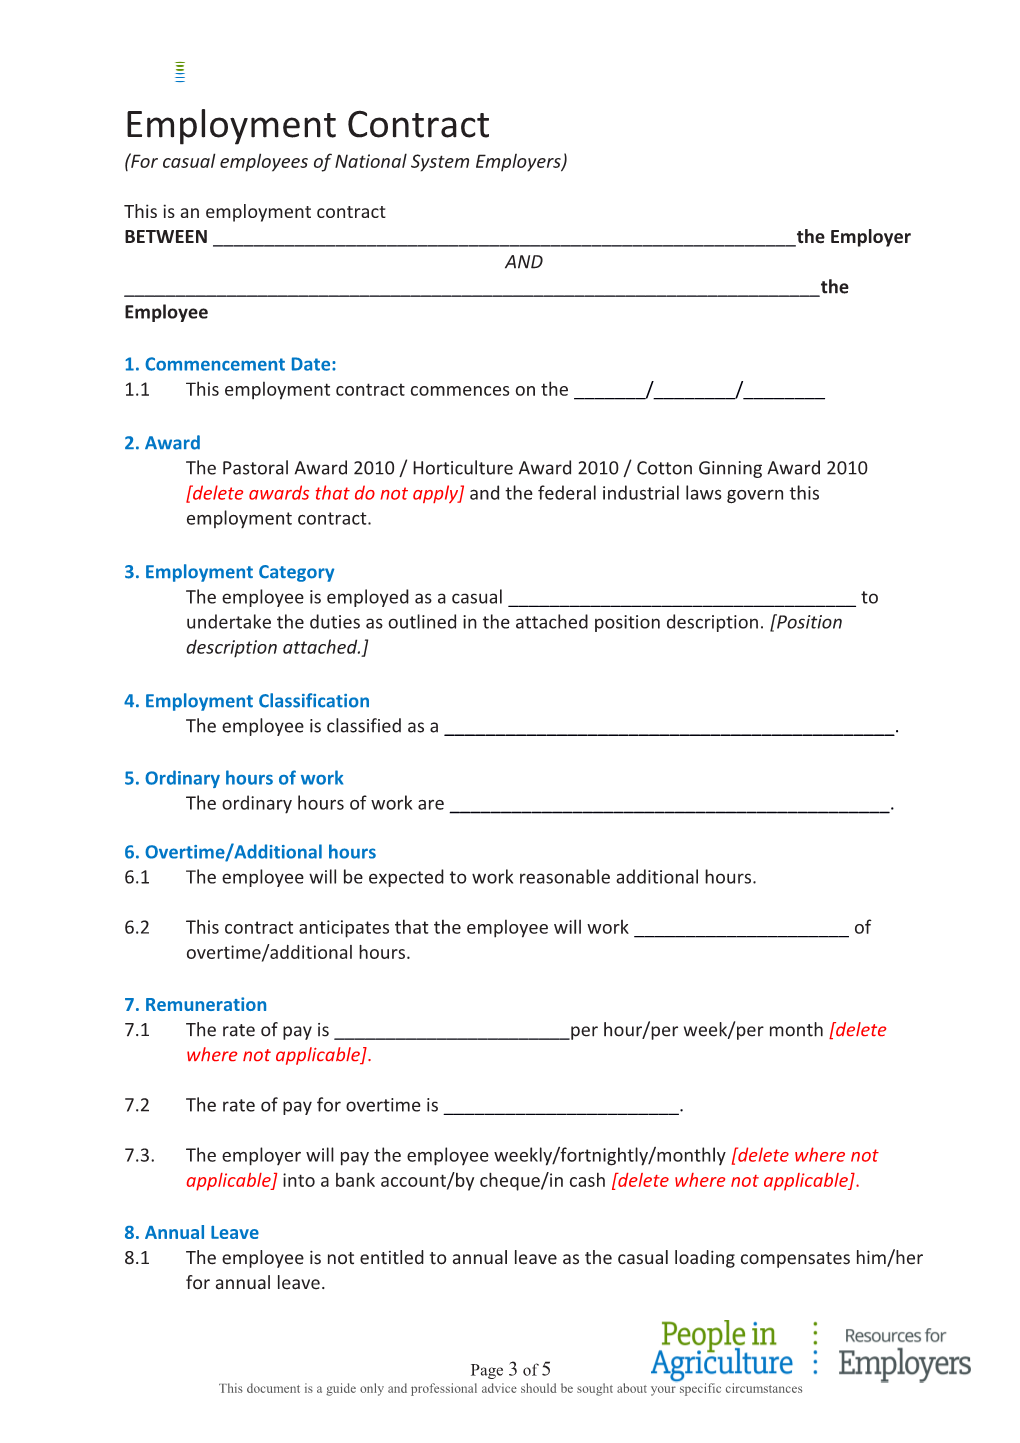 Suggested Steps for Preparing and Using a Contract Template